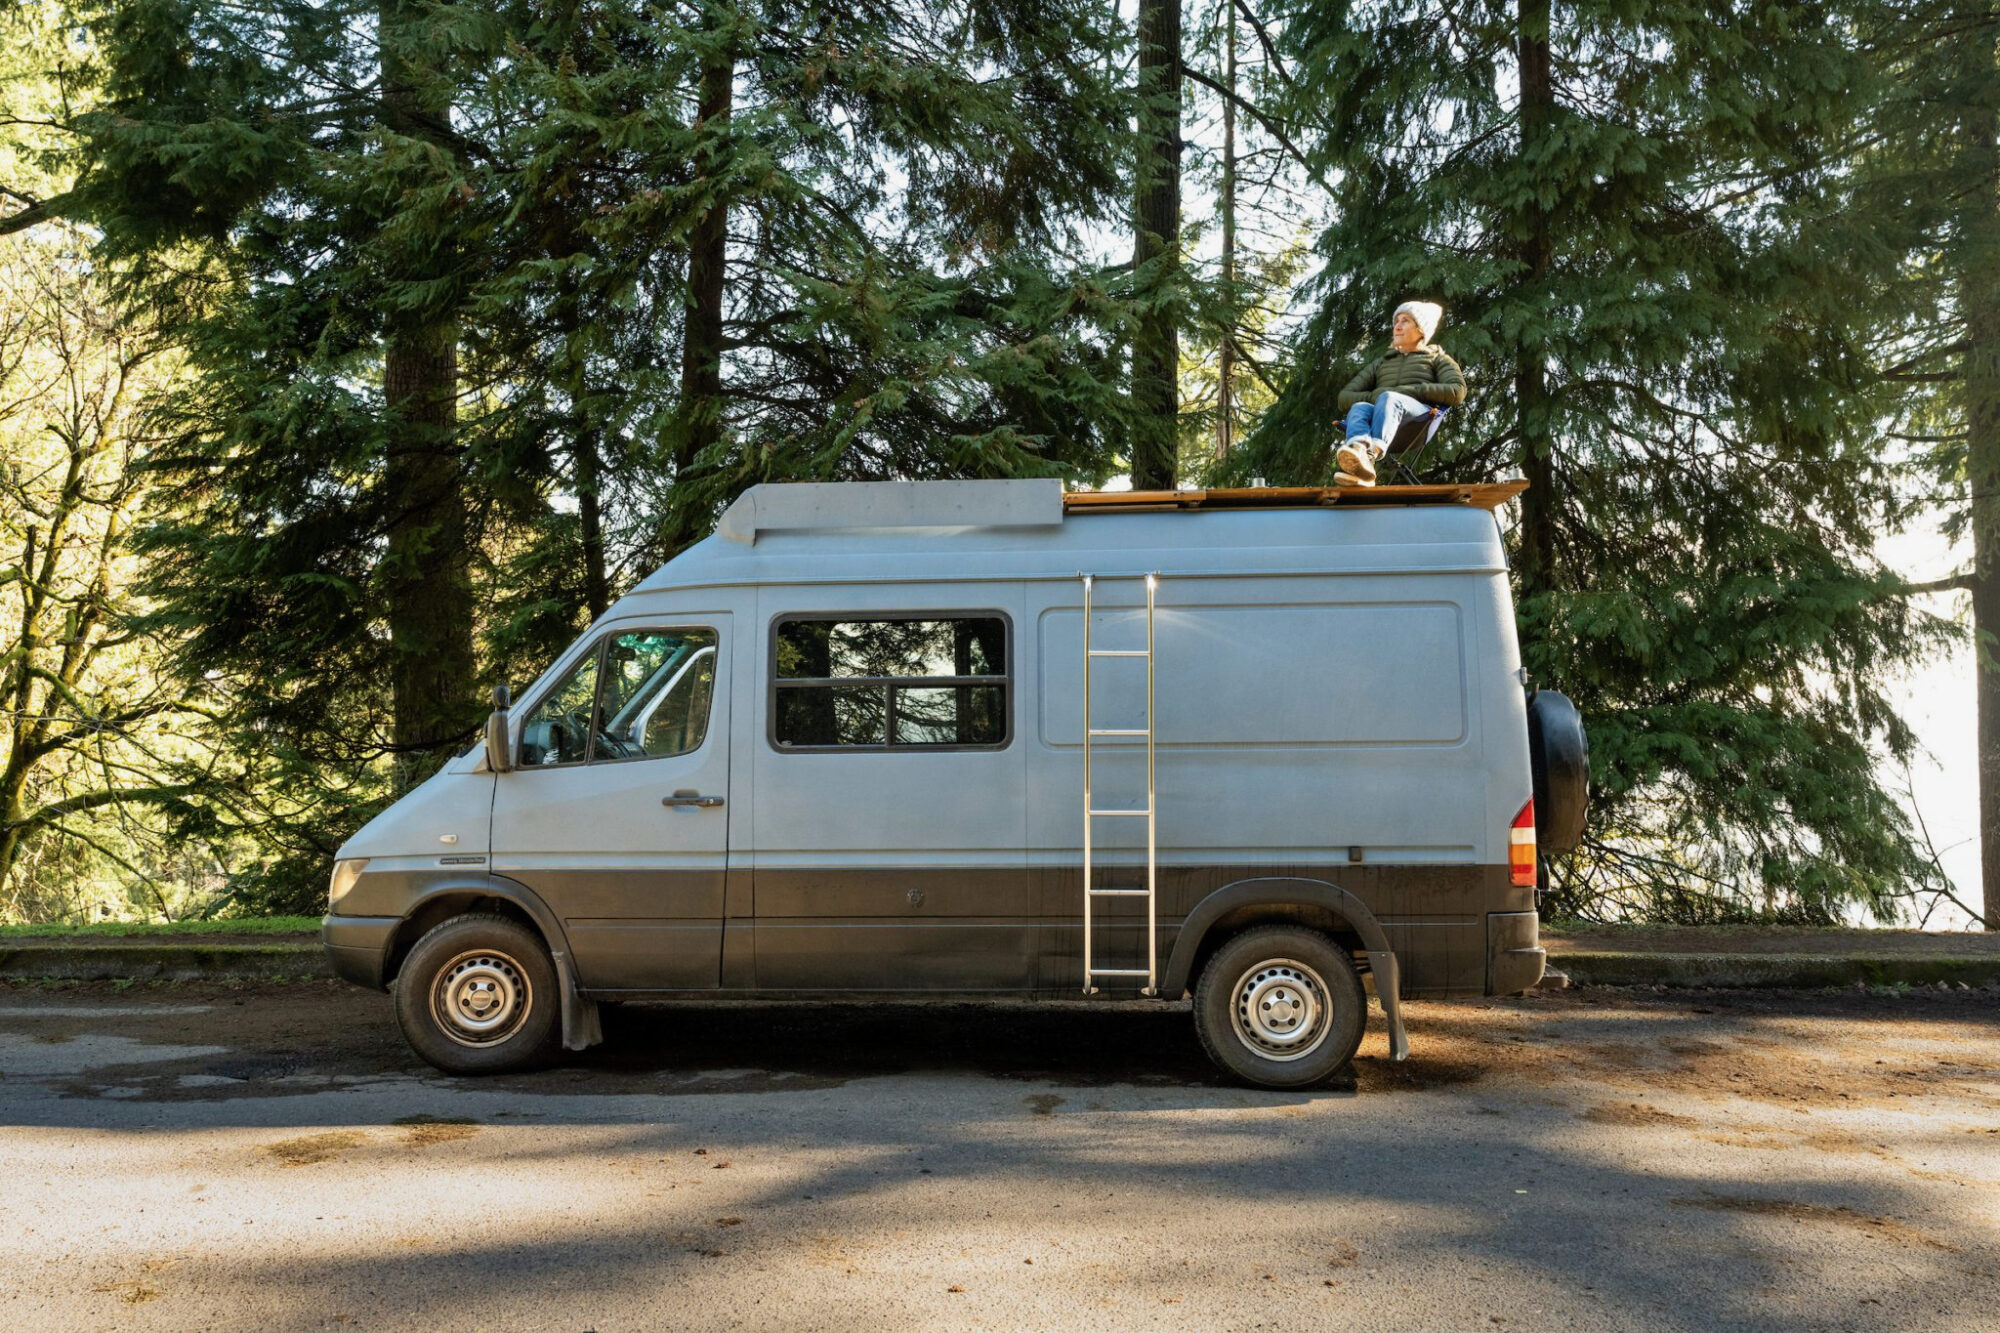 A serene outdoor scene where a person is lounging on top of a vintage white van.